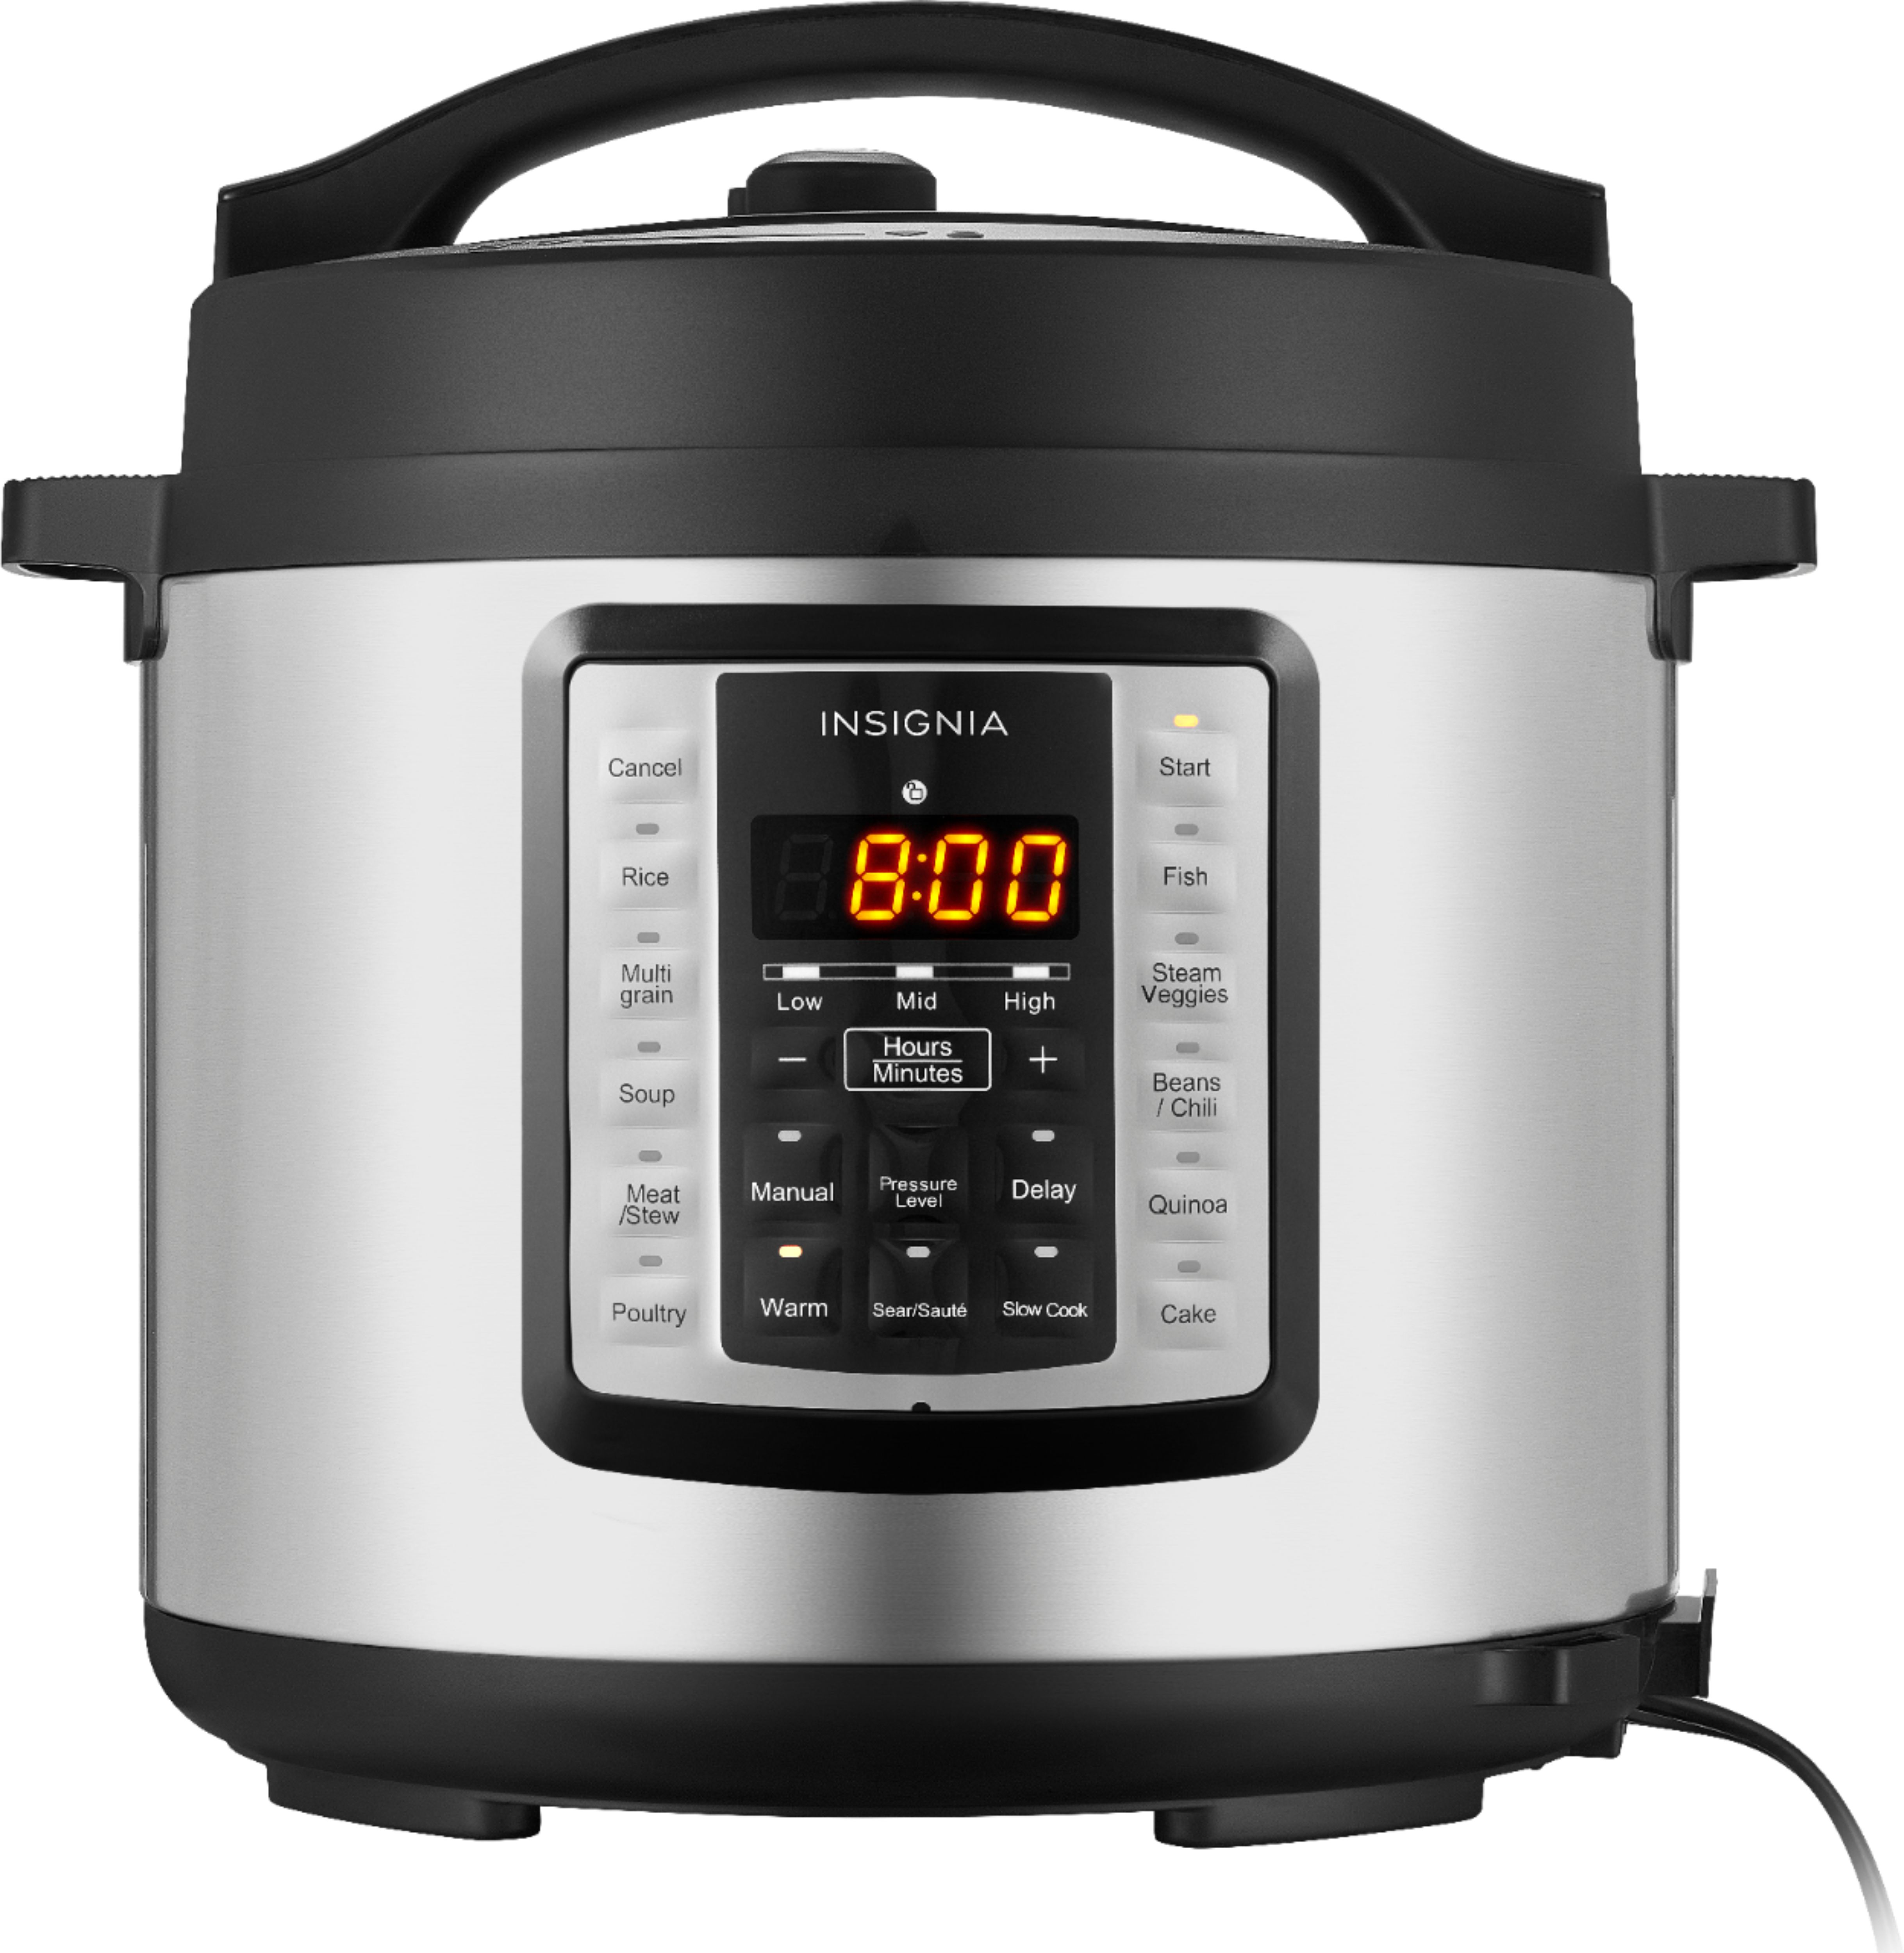 Questions and Answers: Insignia™ 6-Quart Multi-Function Pressure Cooker ...